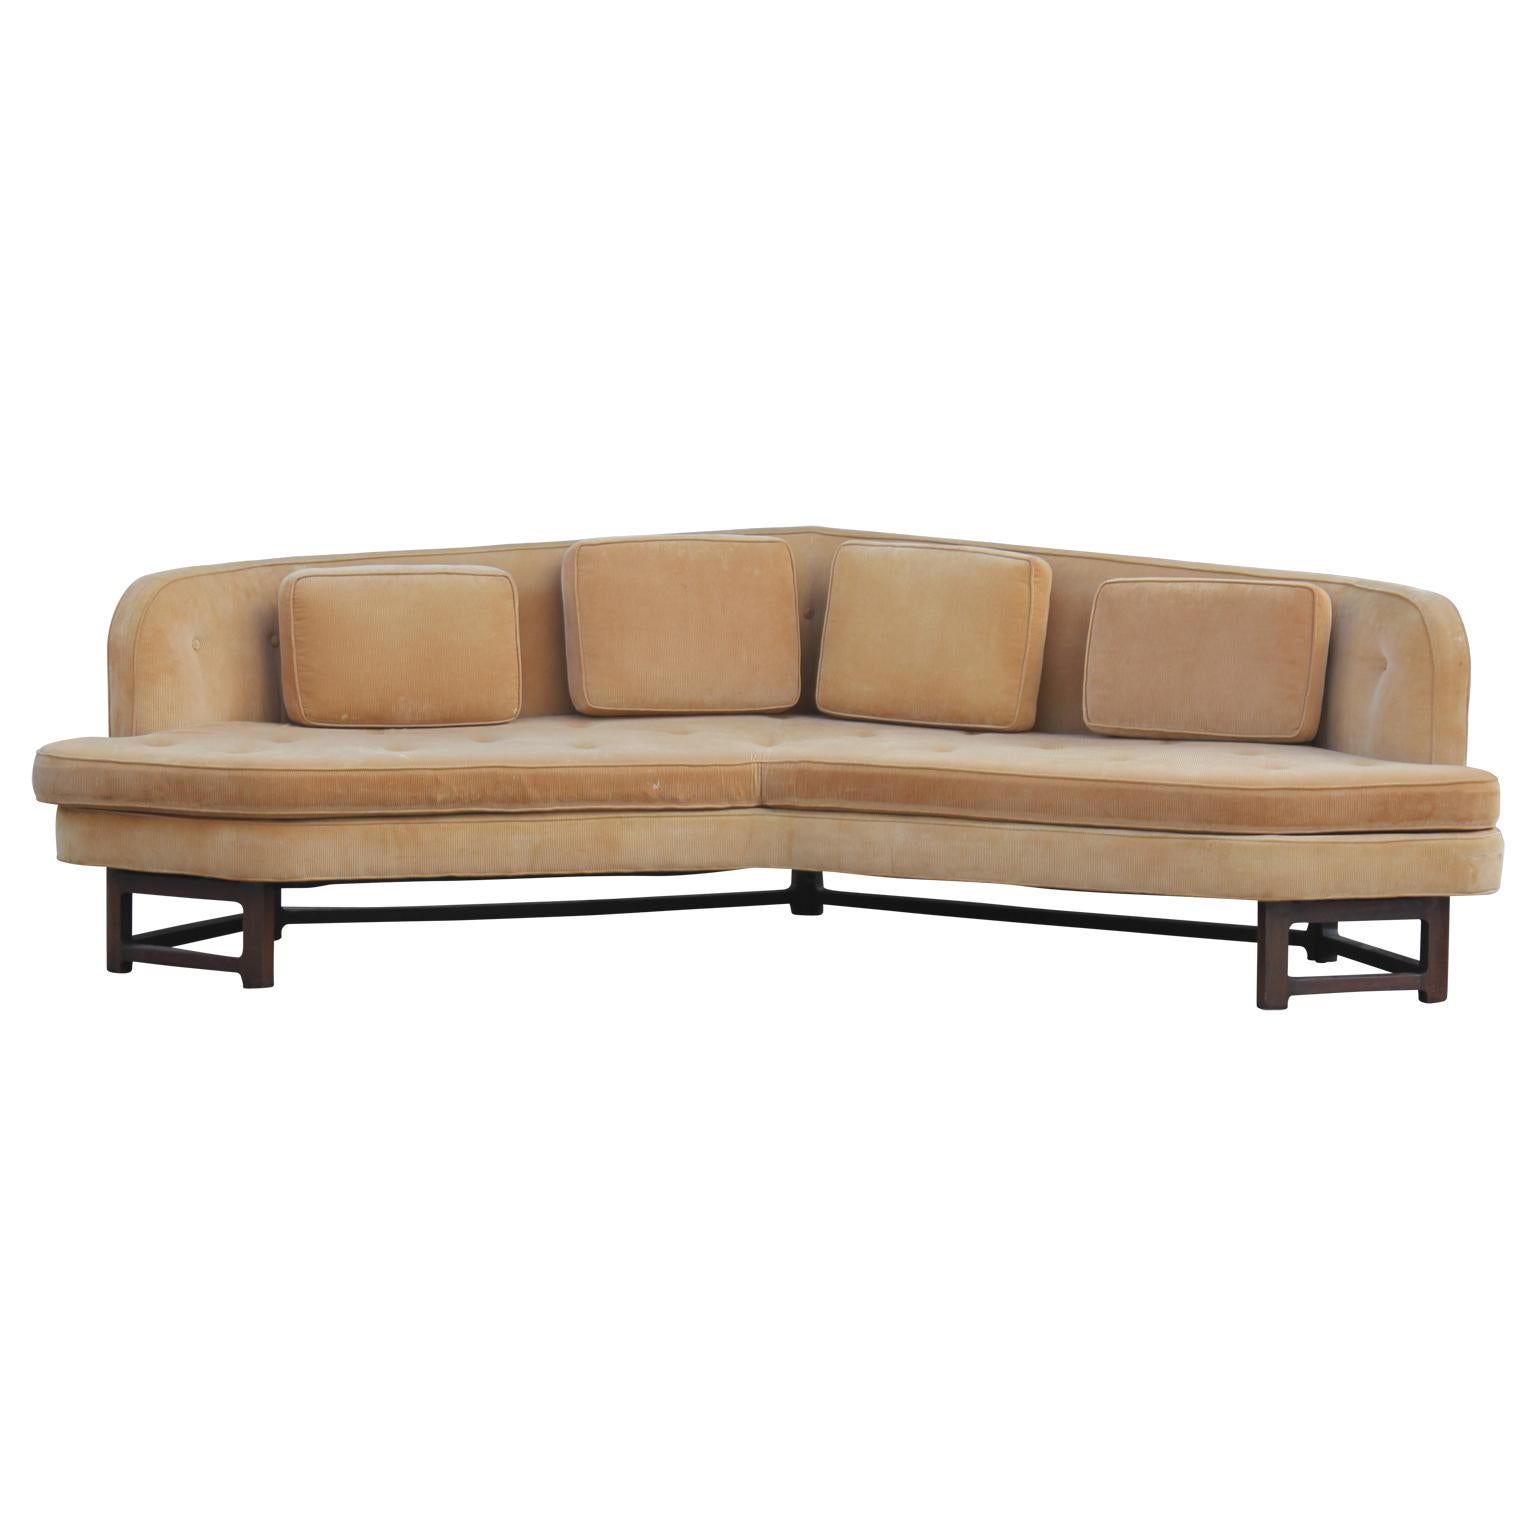 Gorgeous and unique modern wide angle sofa designed by Edward Wormley for Dunbar for their 